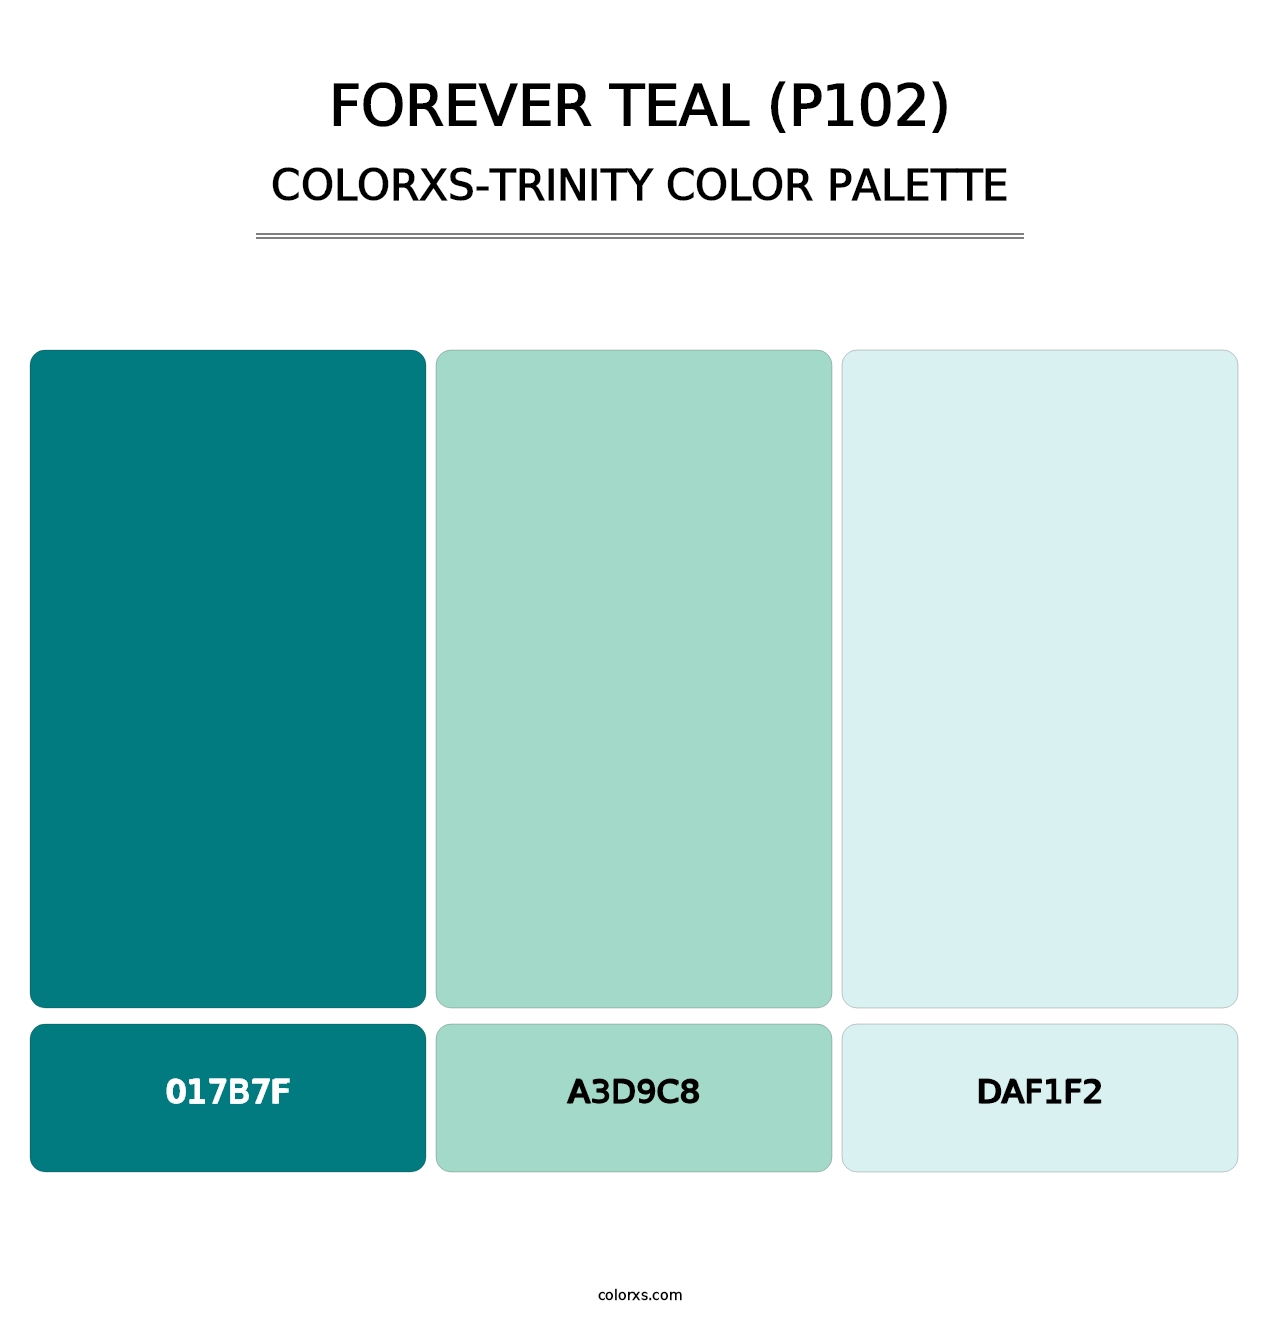 Forever Teal (P102) - Colorxs Trinity Palette